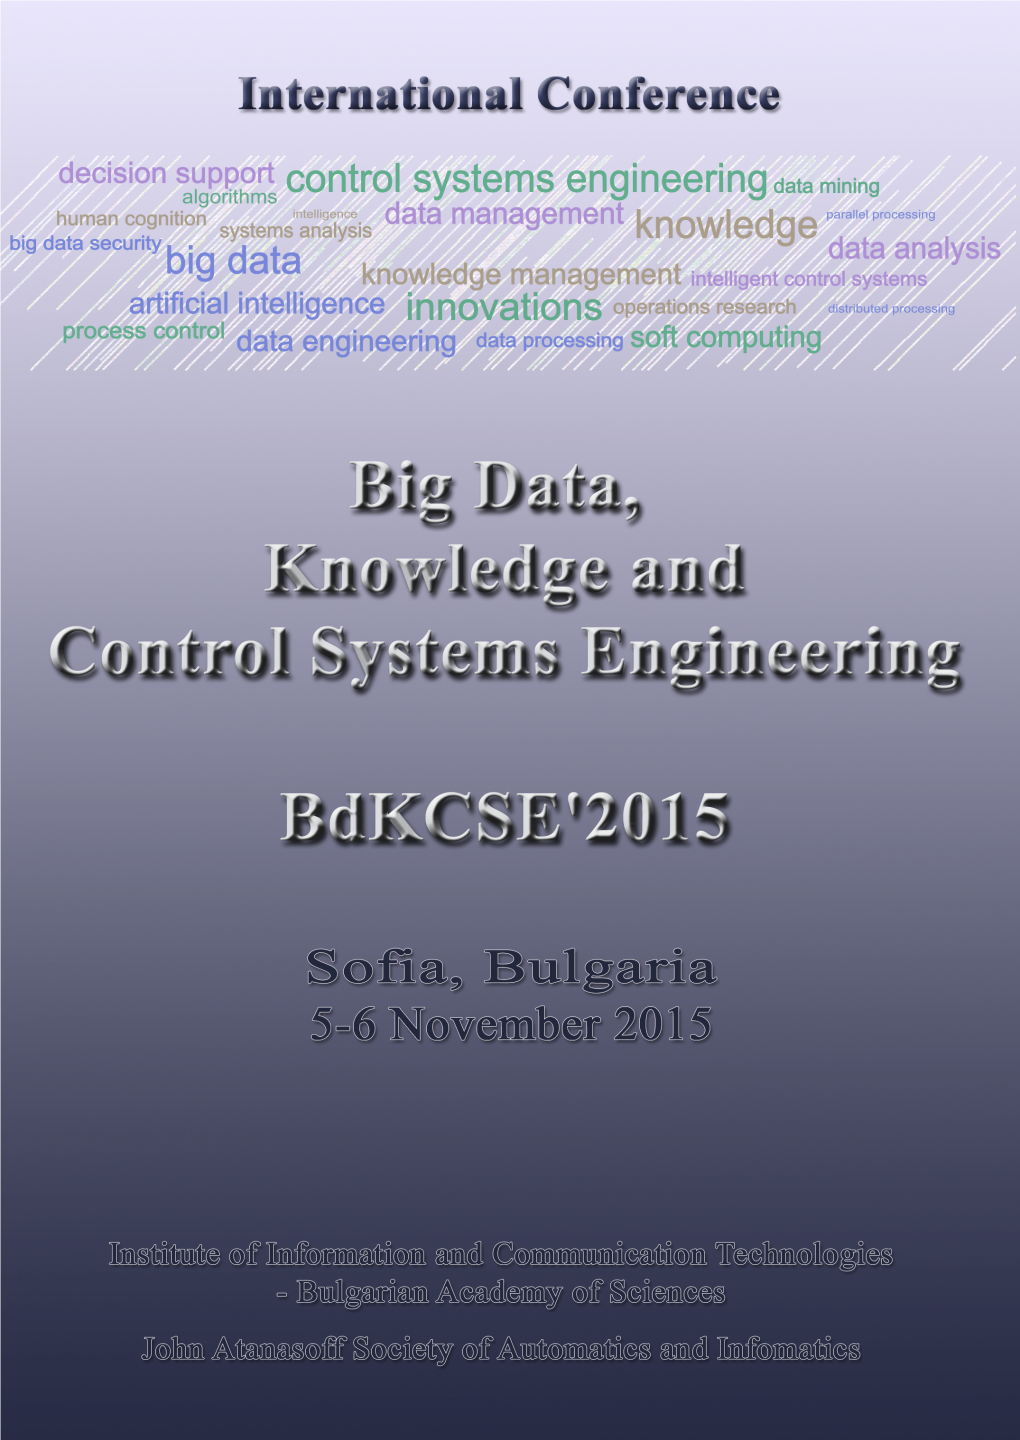 Proceedings of the Bdkcse'2015